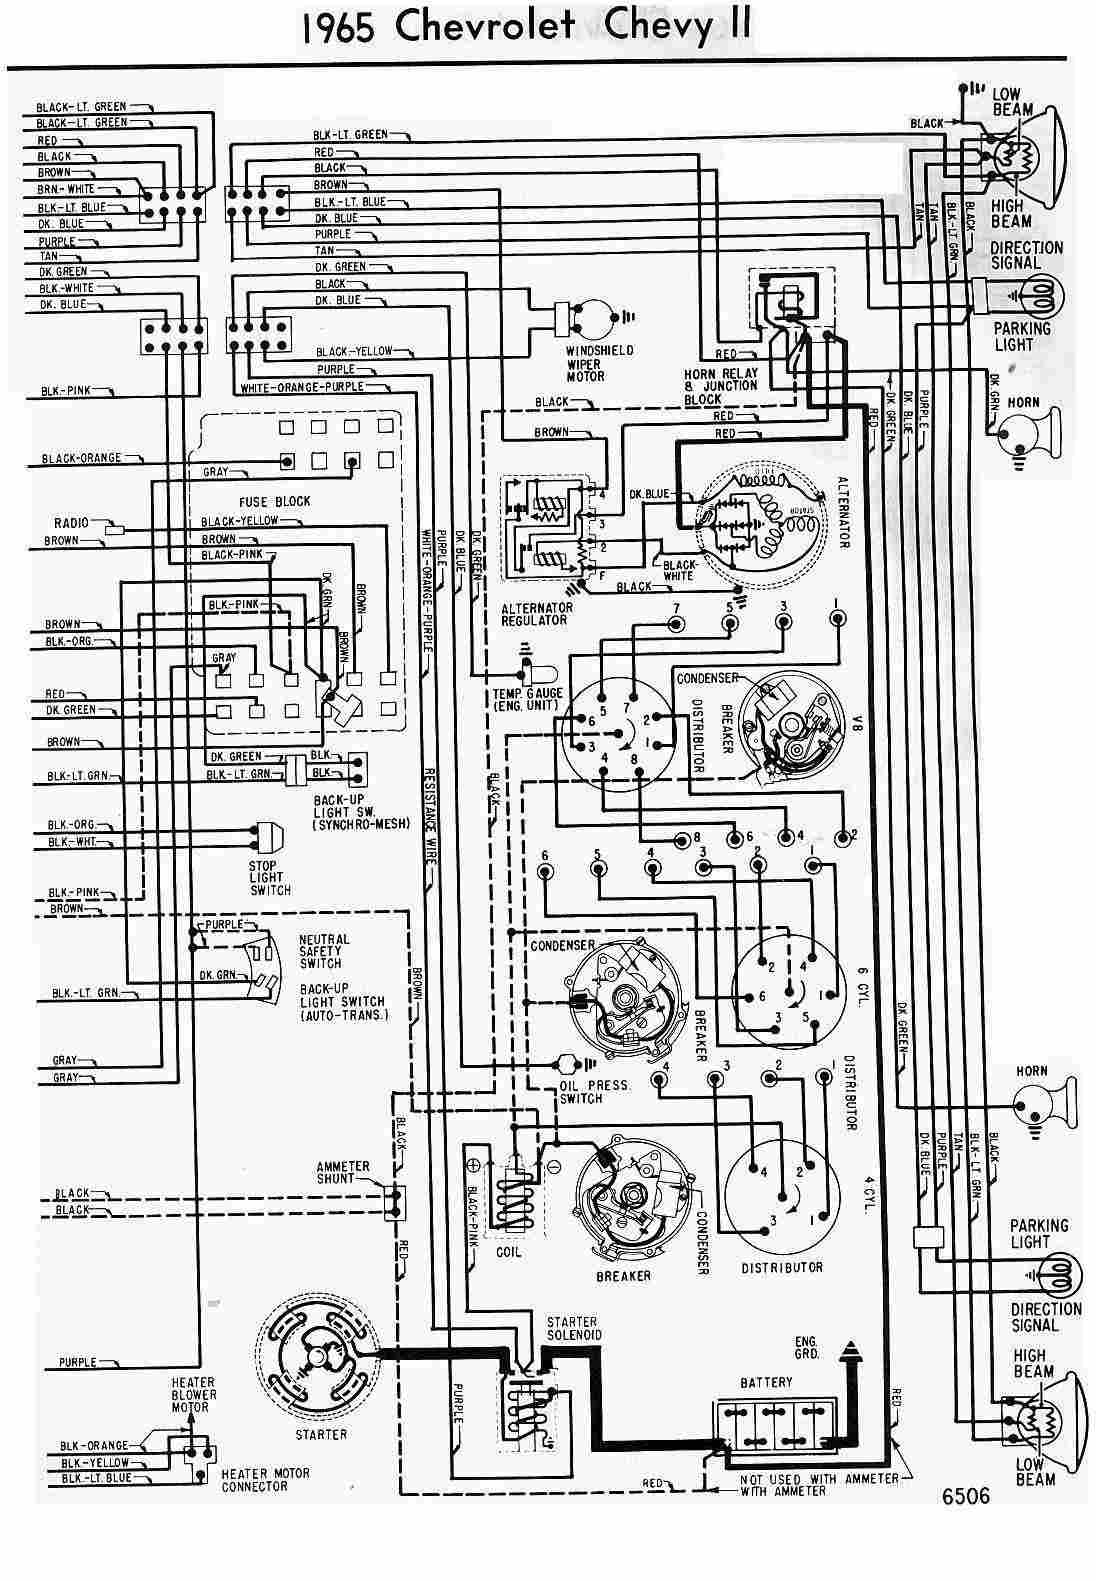 1965 Chevelle Ignition Switch And Starter Wiring Diagram from www.automotive-manuals.net